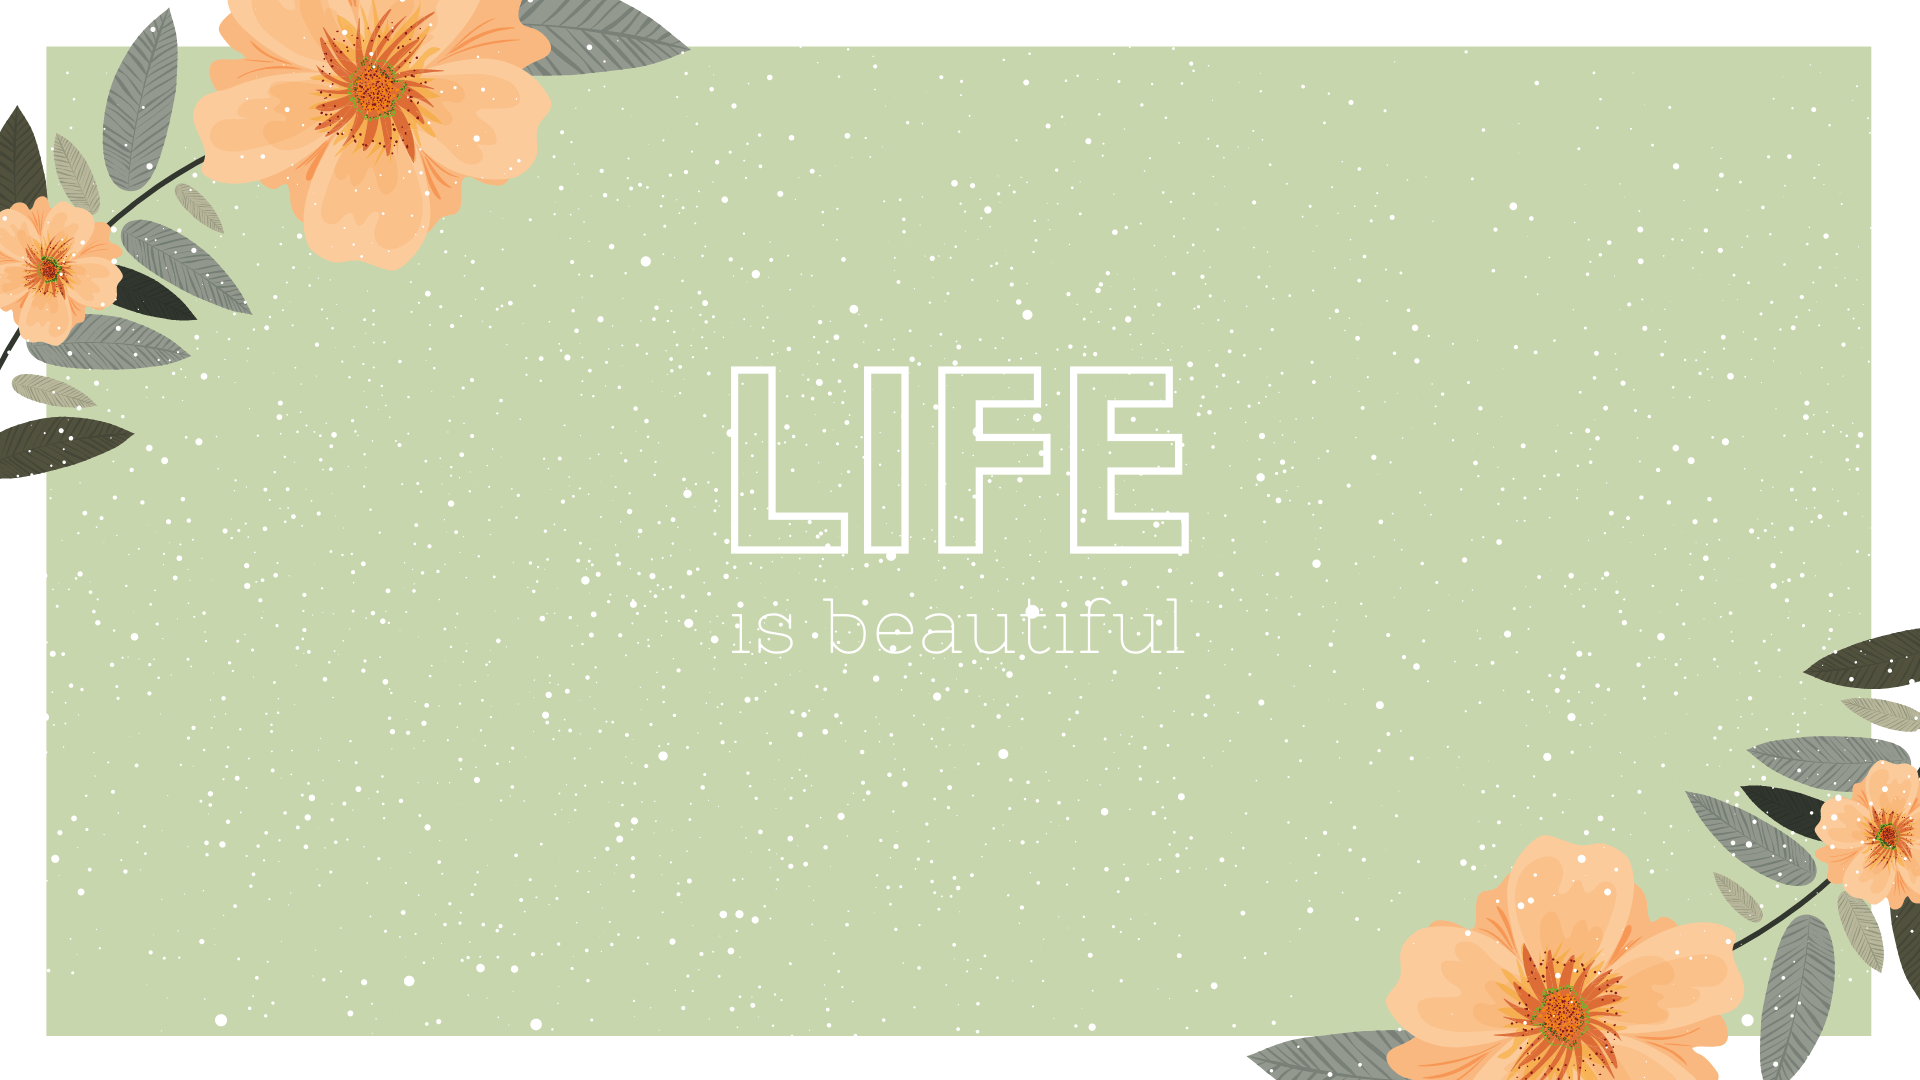 Life is beautiful floral background with text - Inspirational